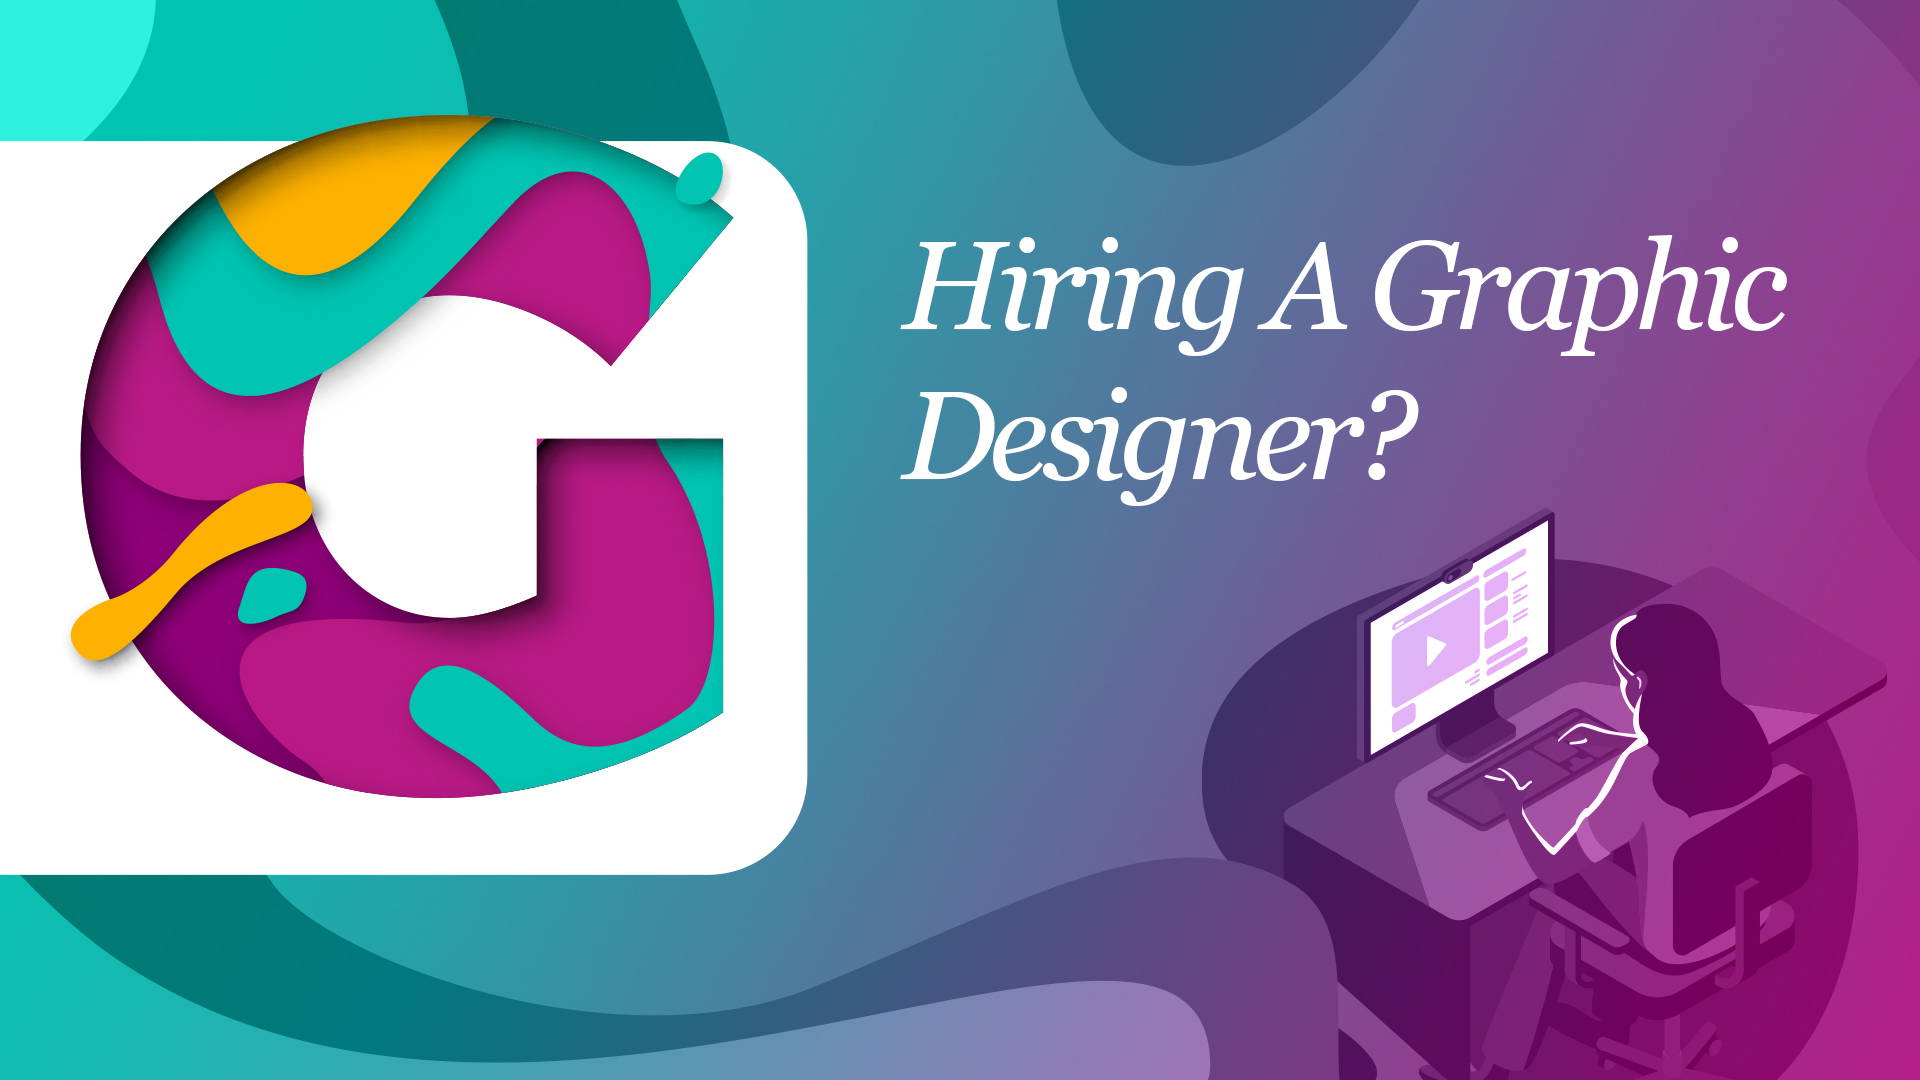 Hiring A Graphic Designer? How To Find The Best Fit For Your Brand